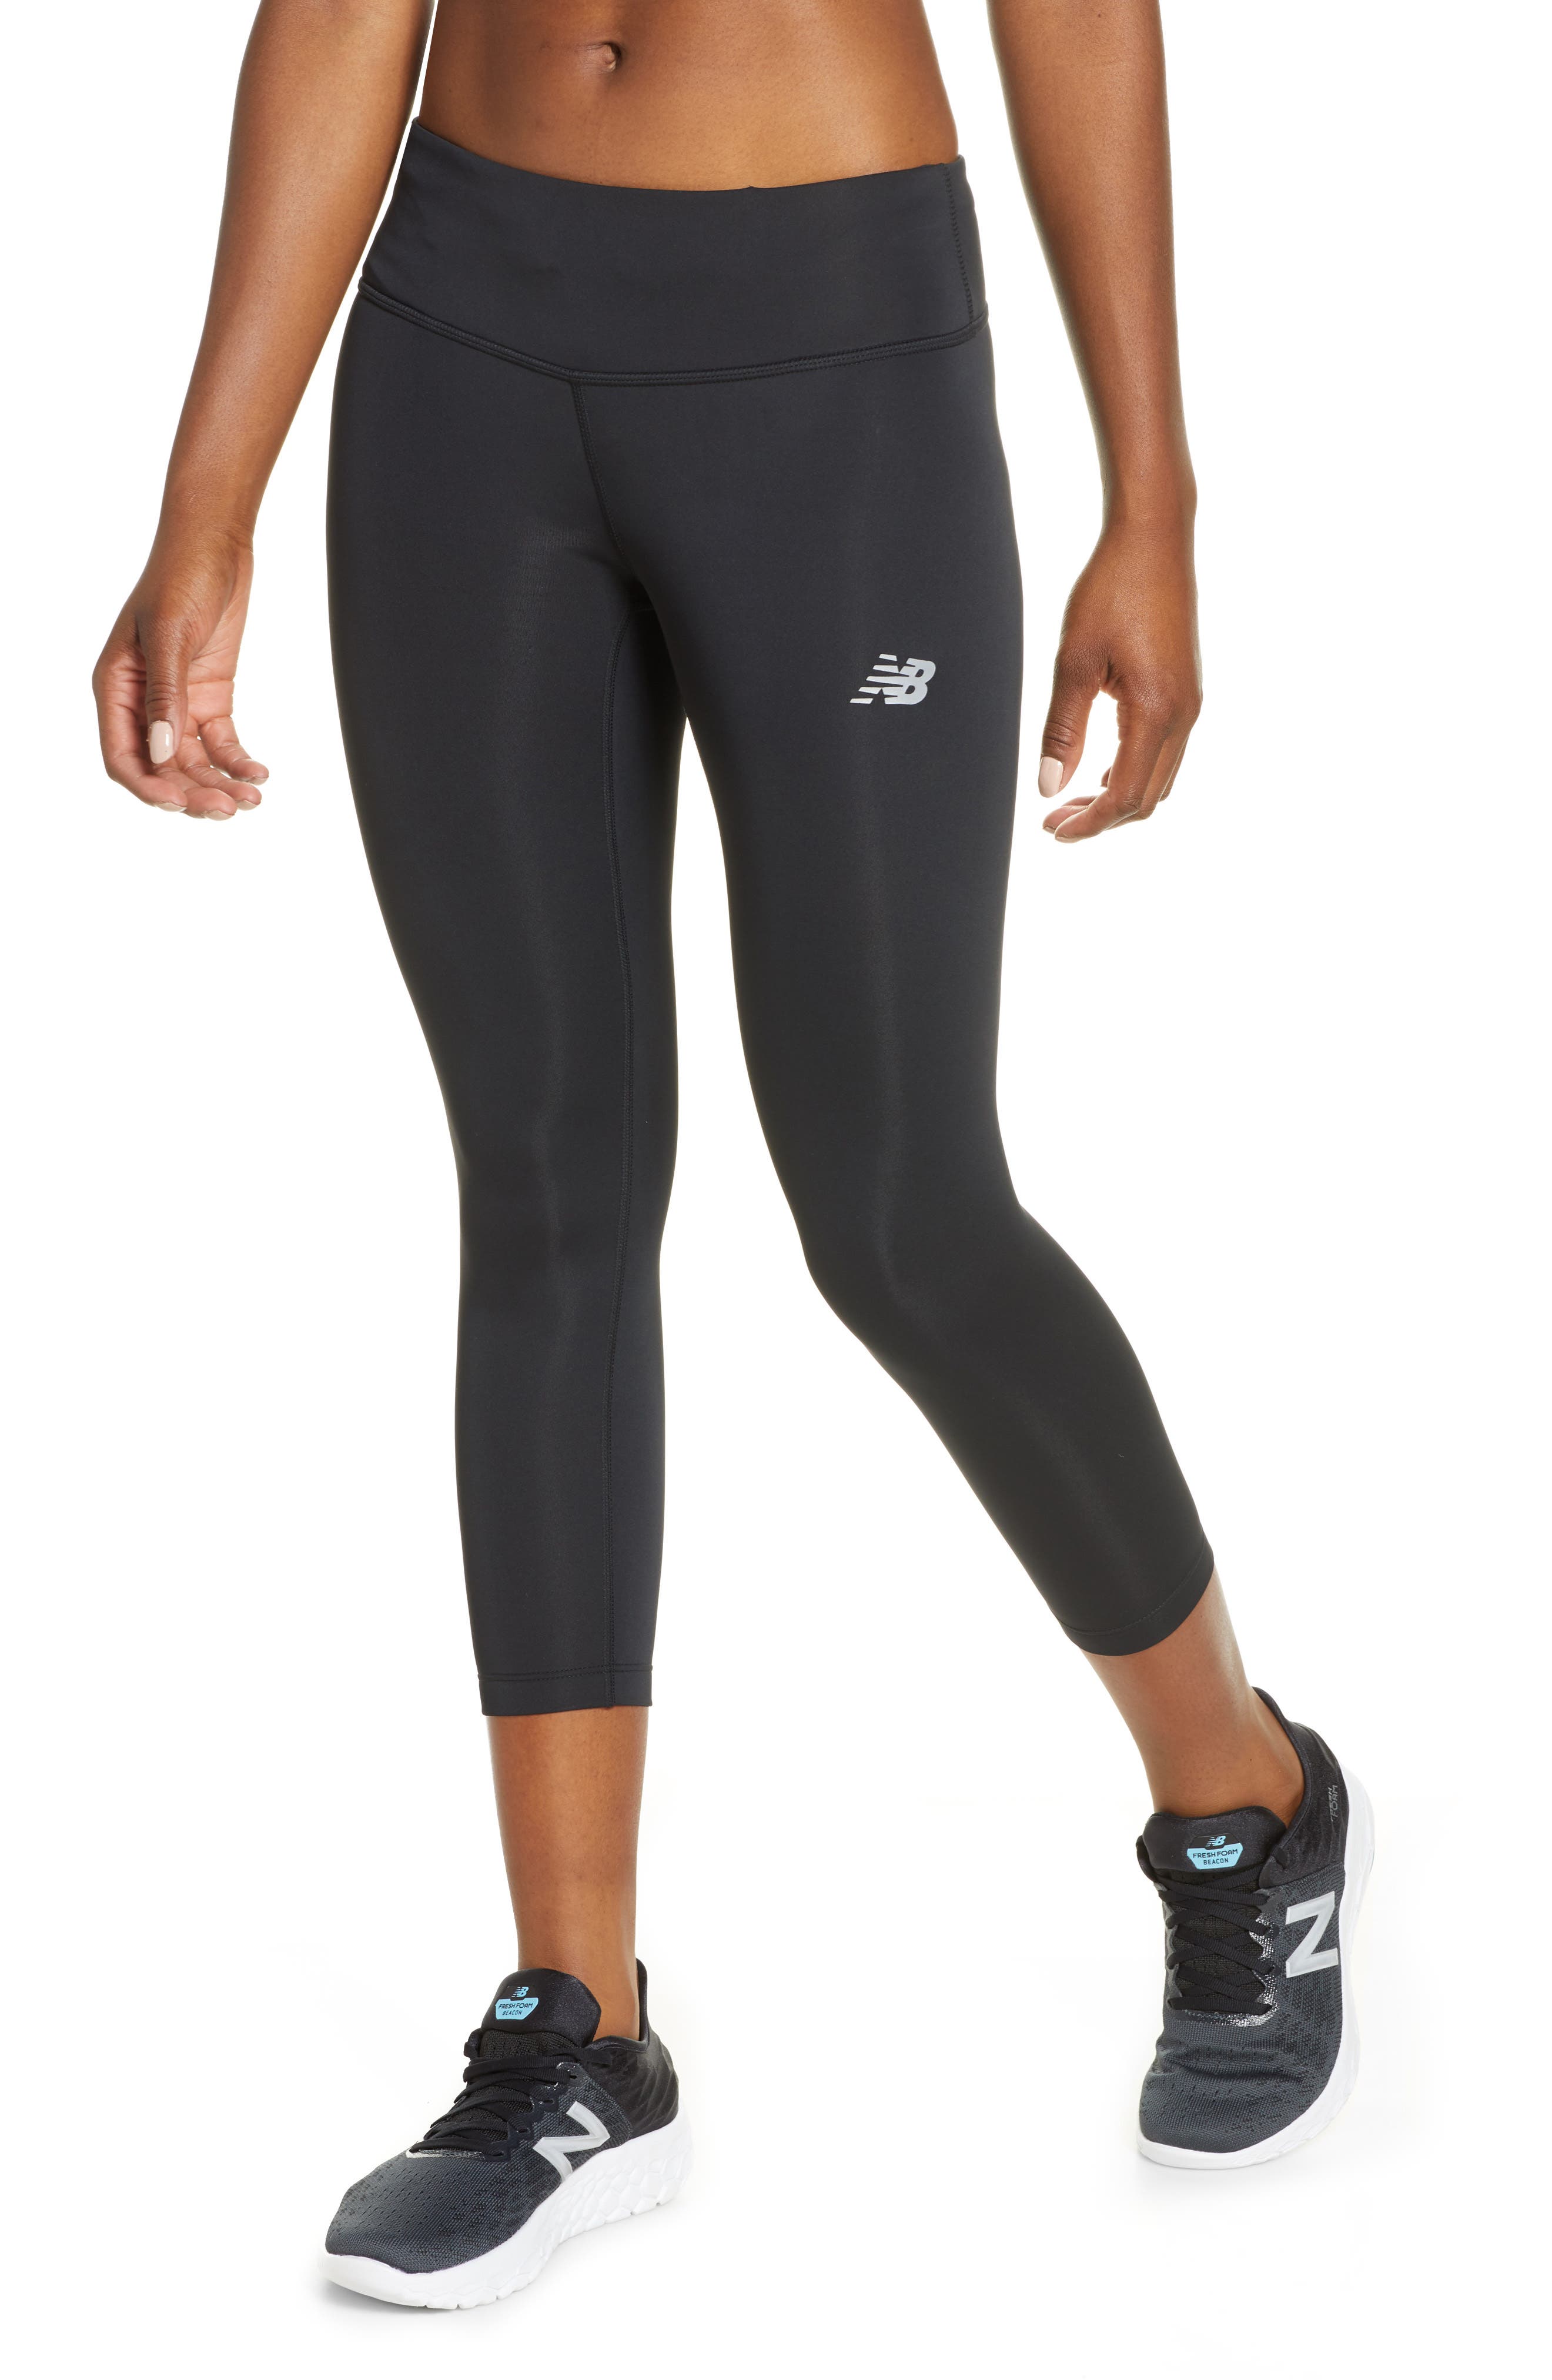 New Balance Workout Leggings Outlet Shop, UP TO 66% OFF | www ... افضل ماسكرا للاستخدام اليومي